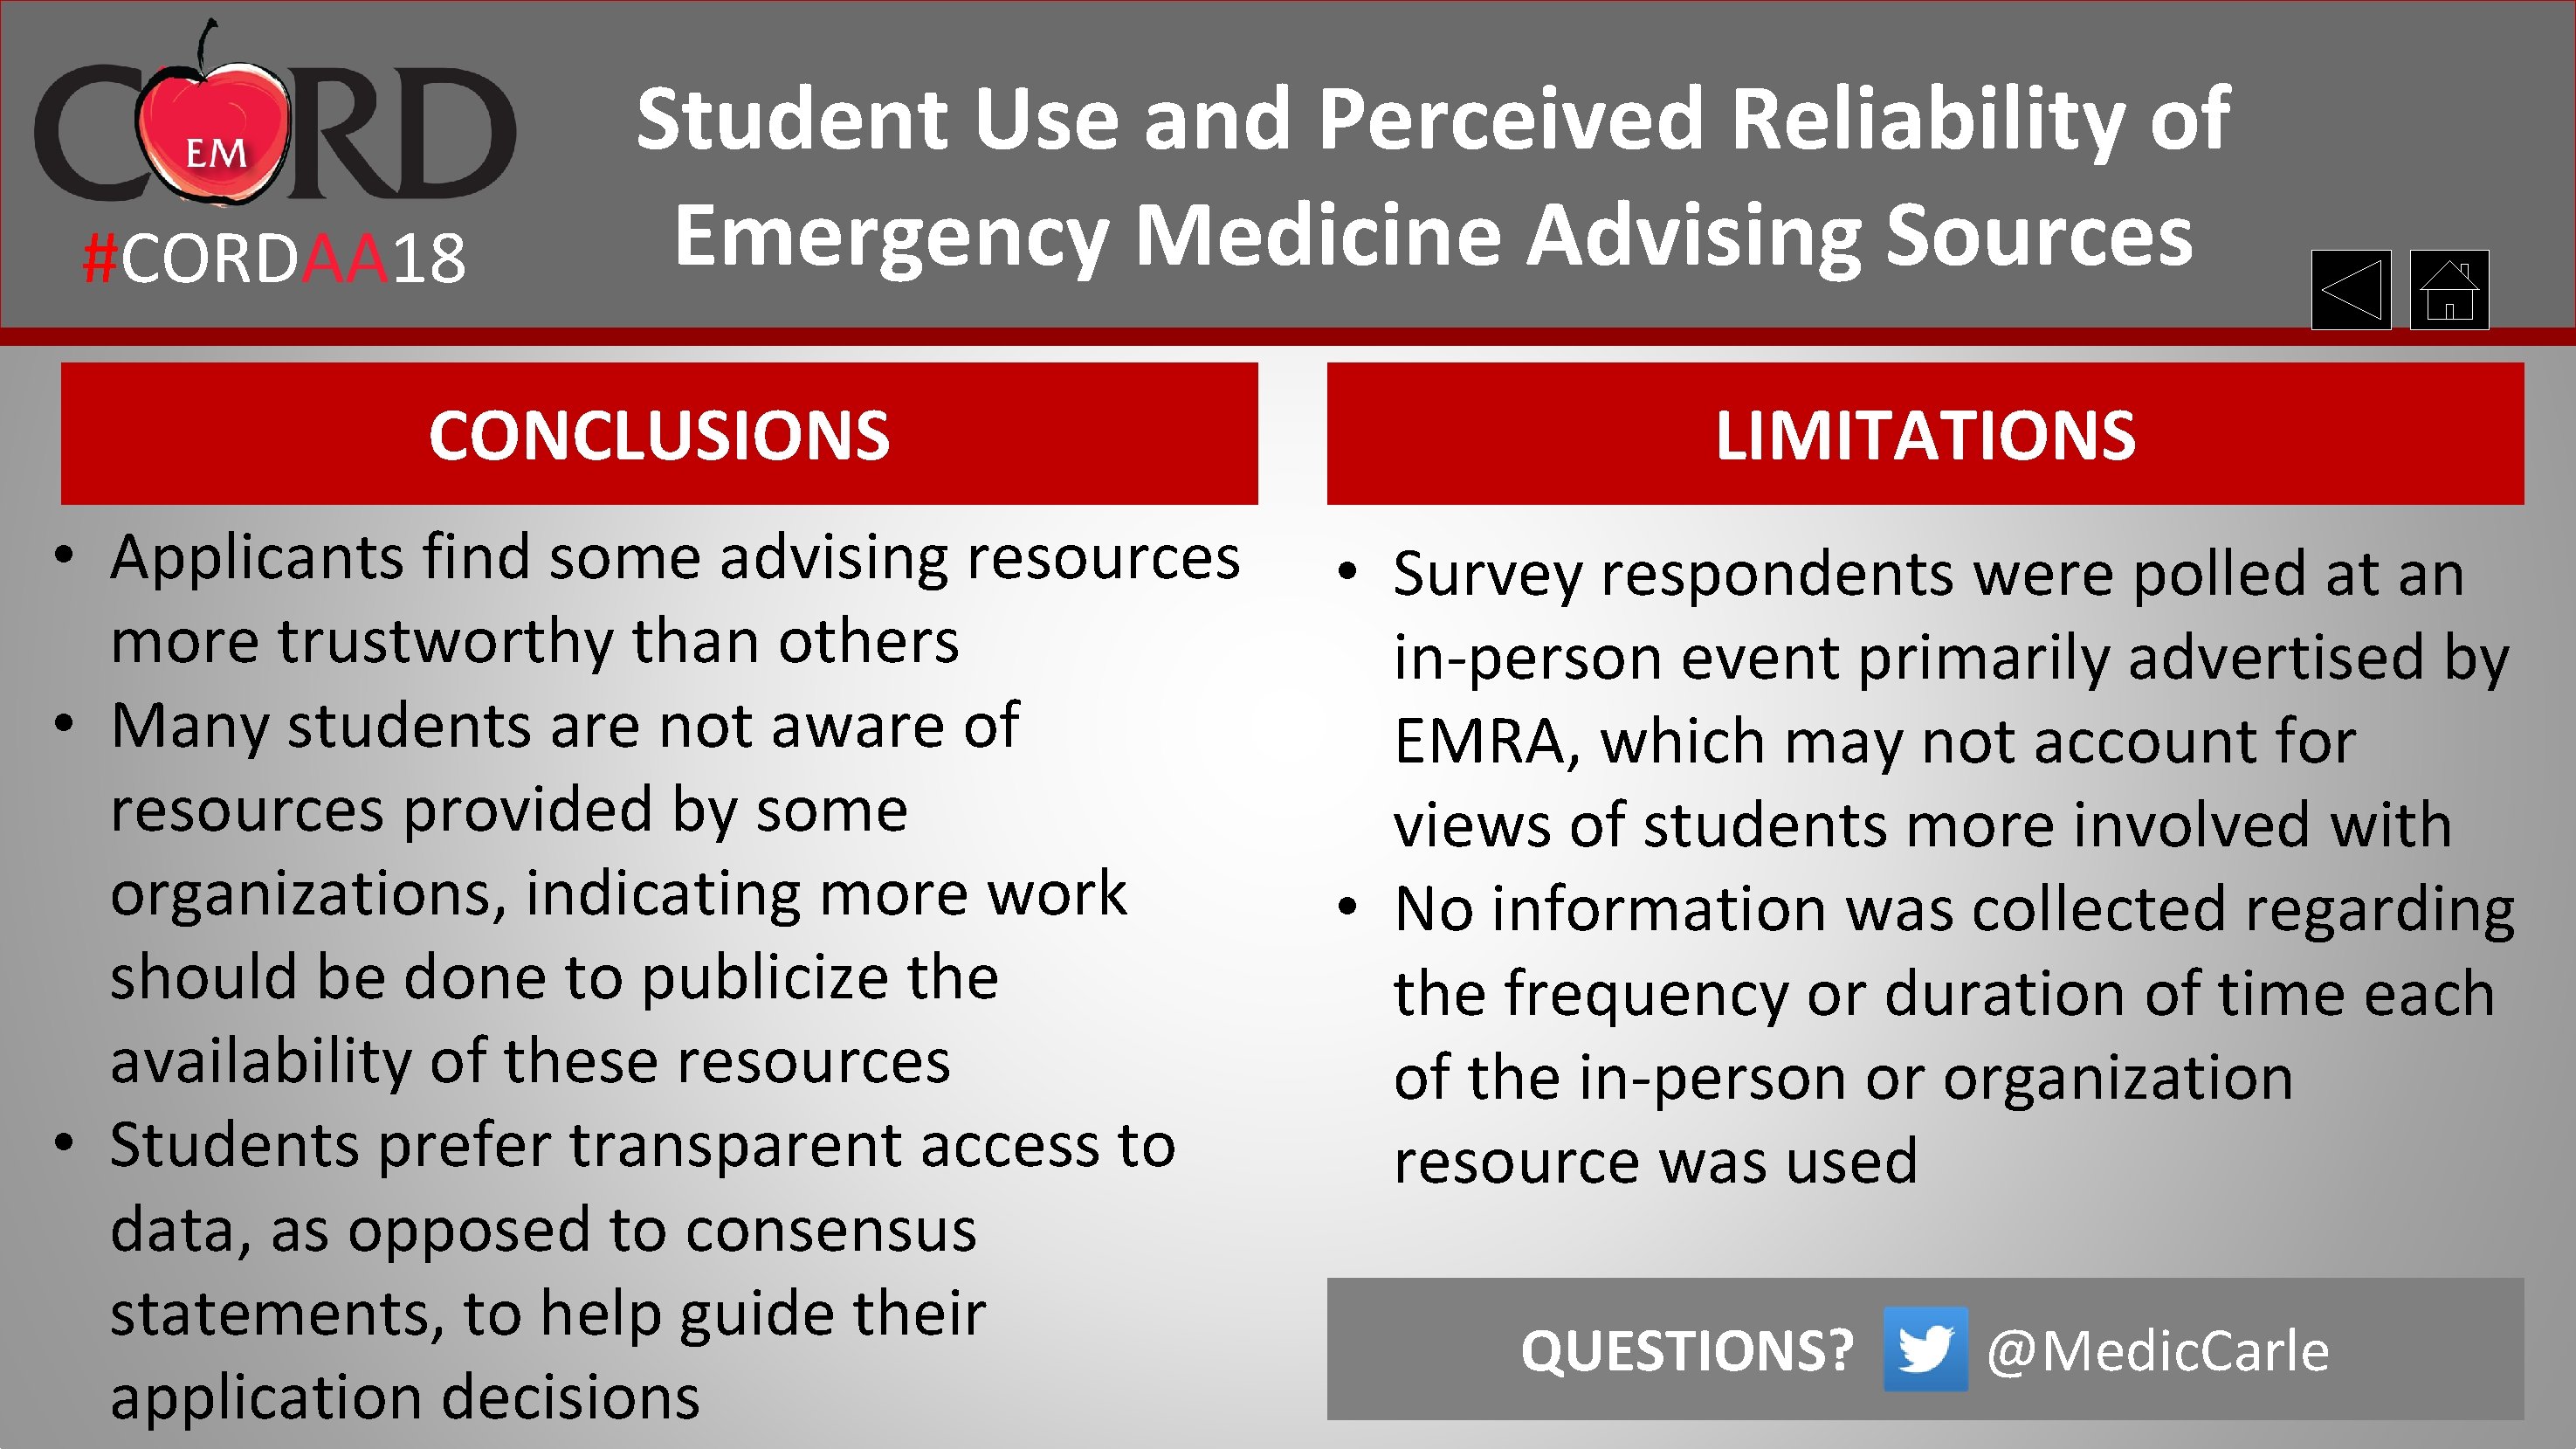 #CORDAA 18 Student Use and Perceived Reliability of Emergency Medicine Advising Sources CONCLUSIONS LIMITATIONS